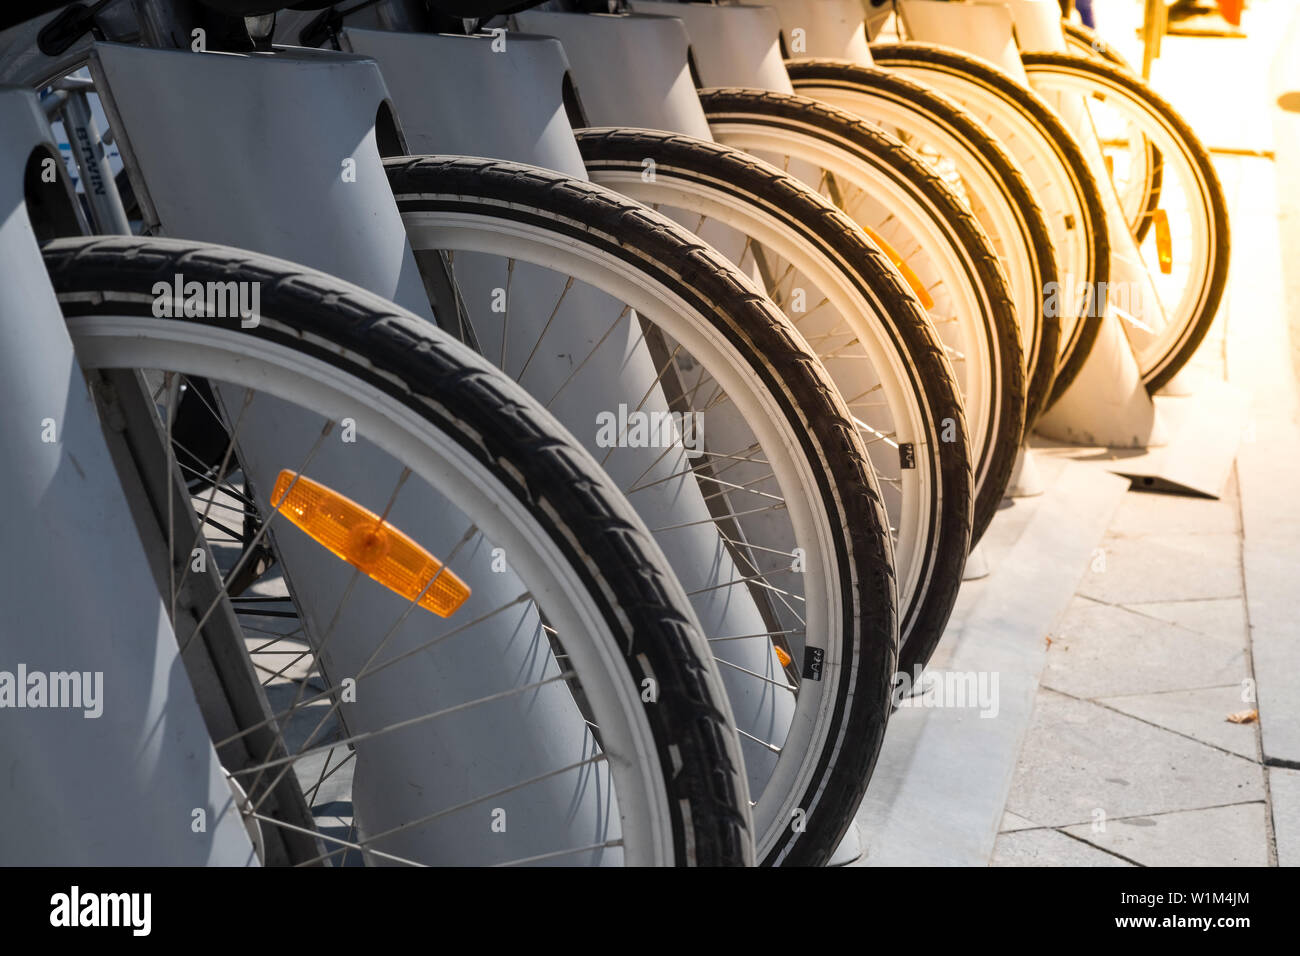 description: Wheels of parked bikes in the bike rental Parking lot.Bike hire pick up station.Rent a bike cheaply.Bicycle wheel in the perspective of t Stock Photo